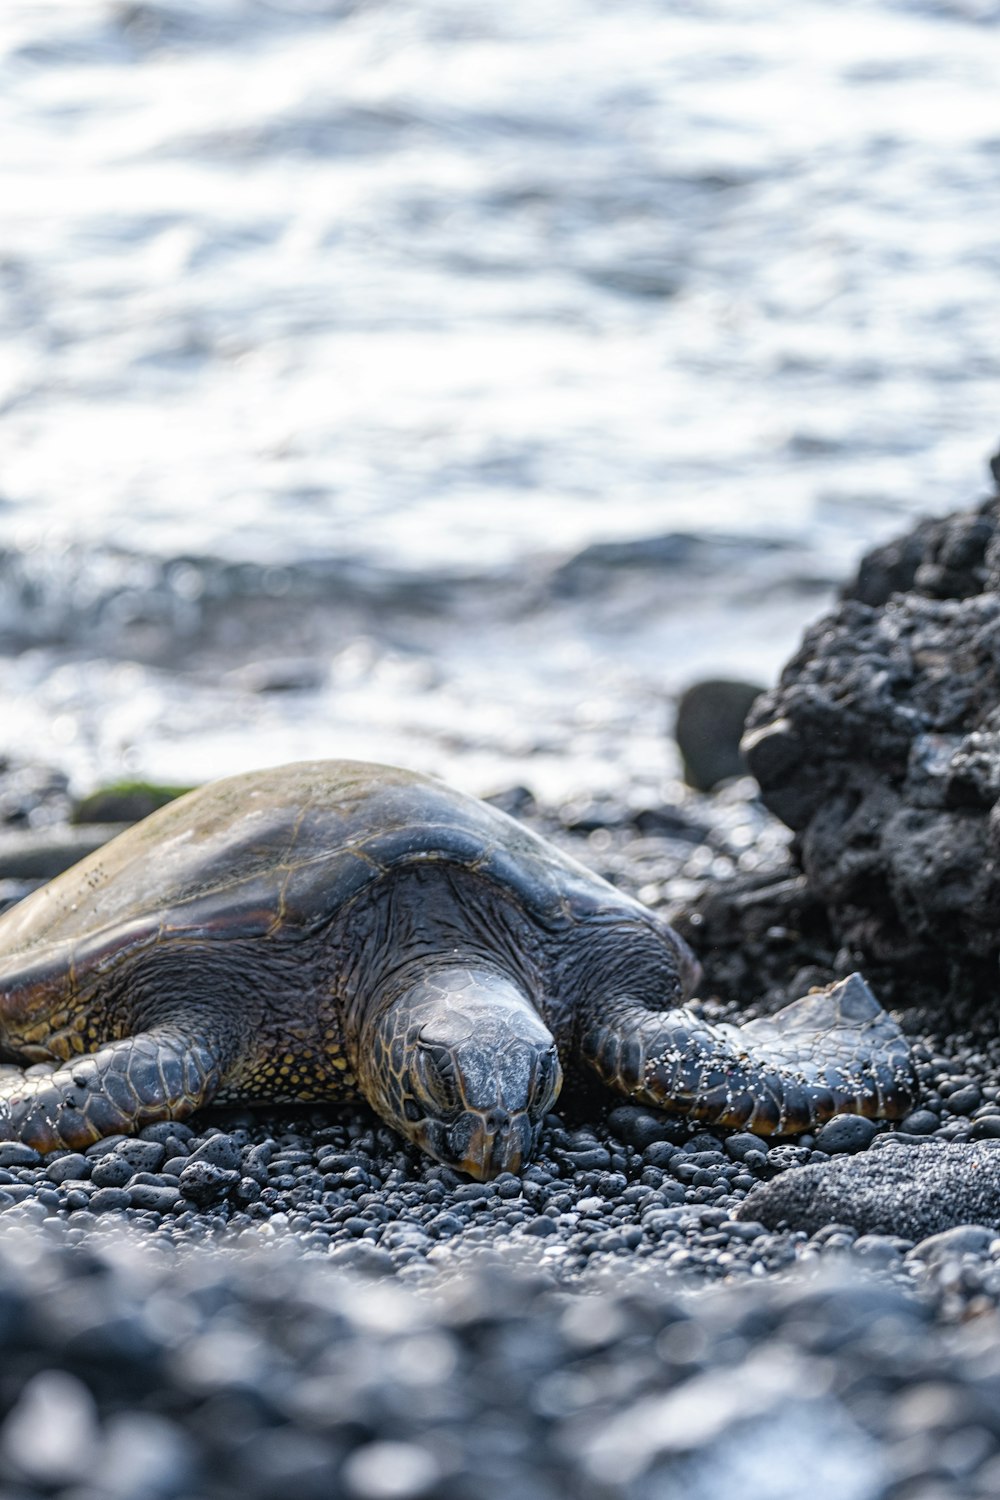 a large turtle laying on top of a rocky beach